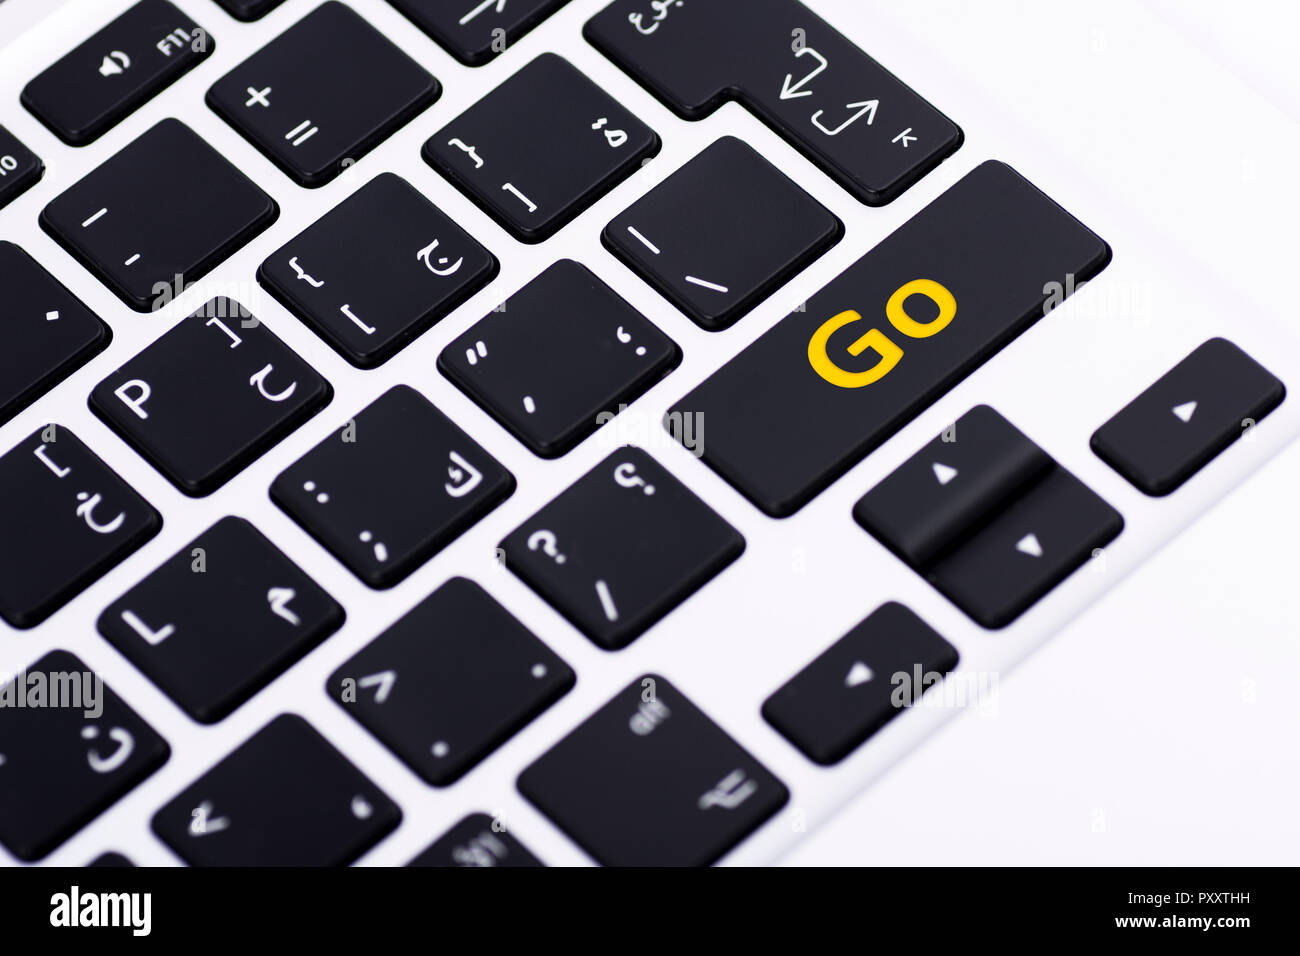 Go on keyboard button Stock Photo